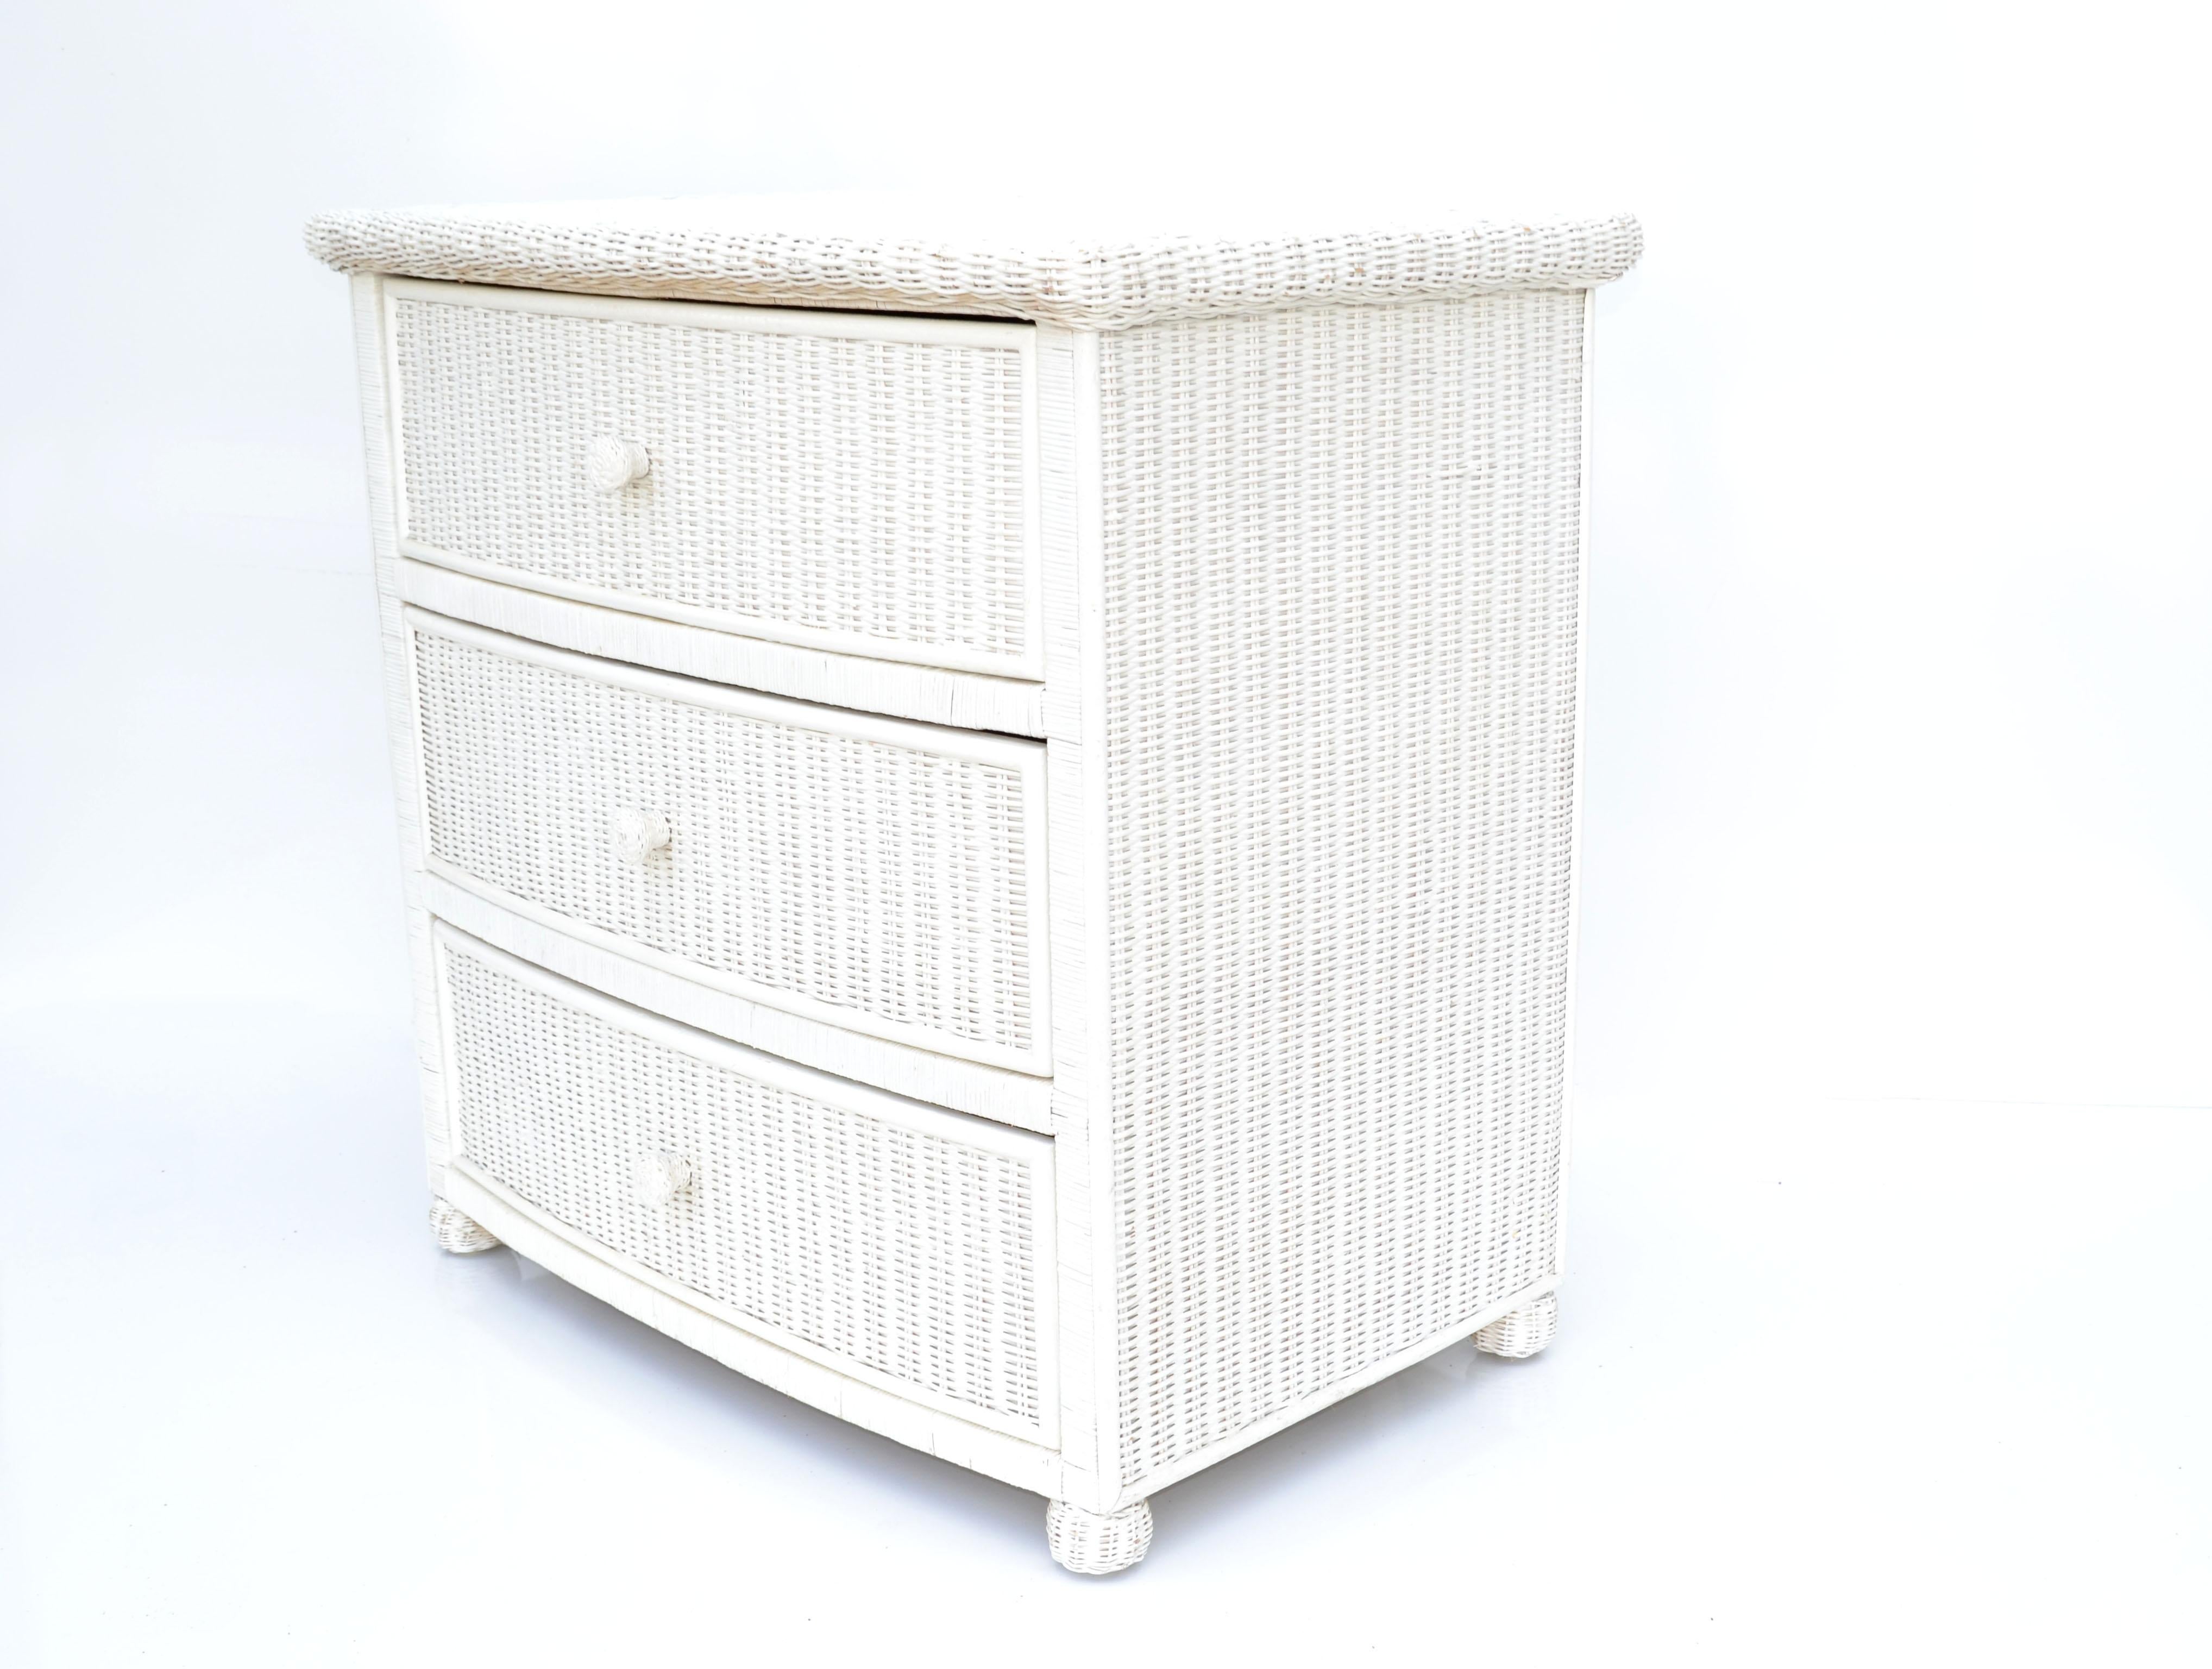 American Mid-Century Modern wicker by Henry Link handcrafted 3 drawers wicker dresser, commode or chest of drawers.
All hand woven cane and a wooden back wall. 
All original 1980s condition with some minor scuffs to the finish.
Great for your